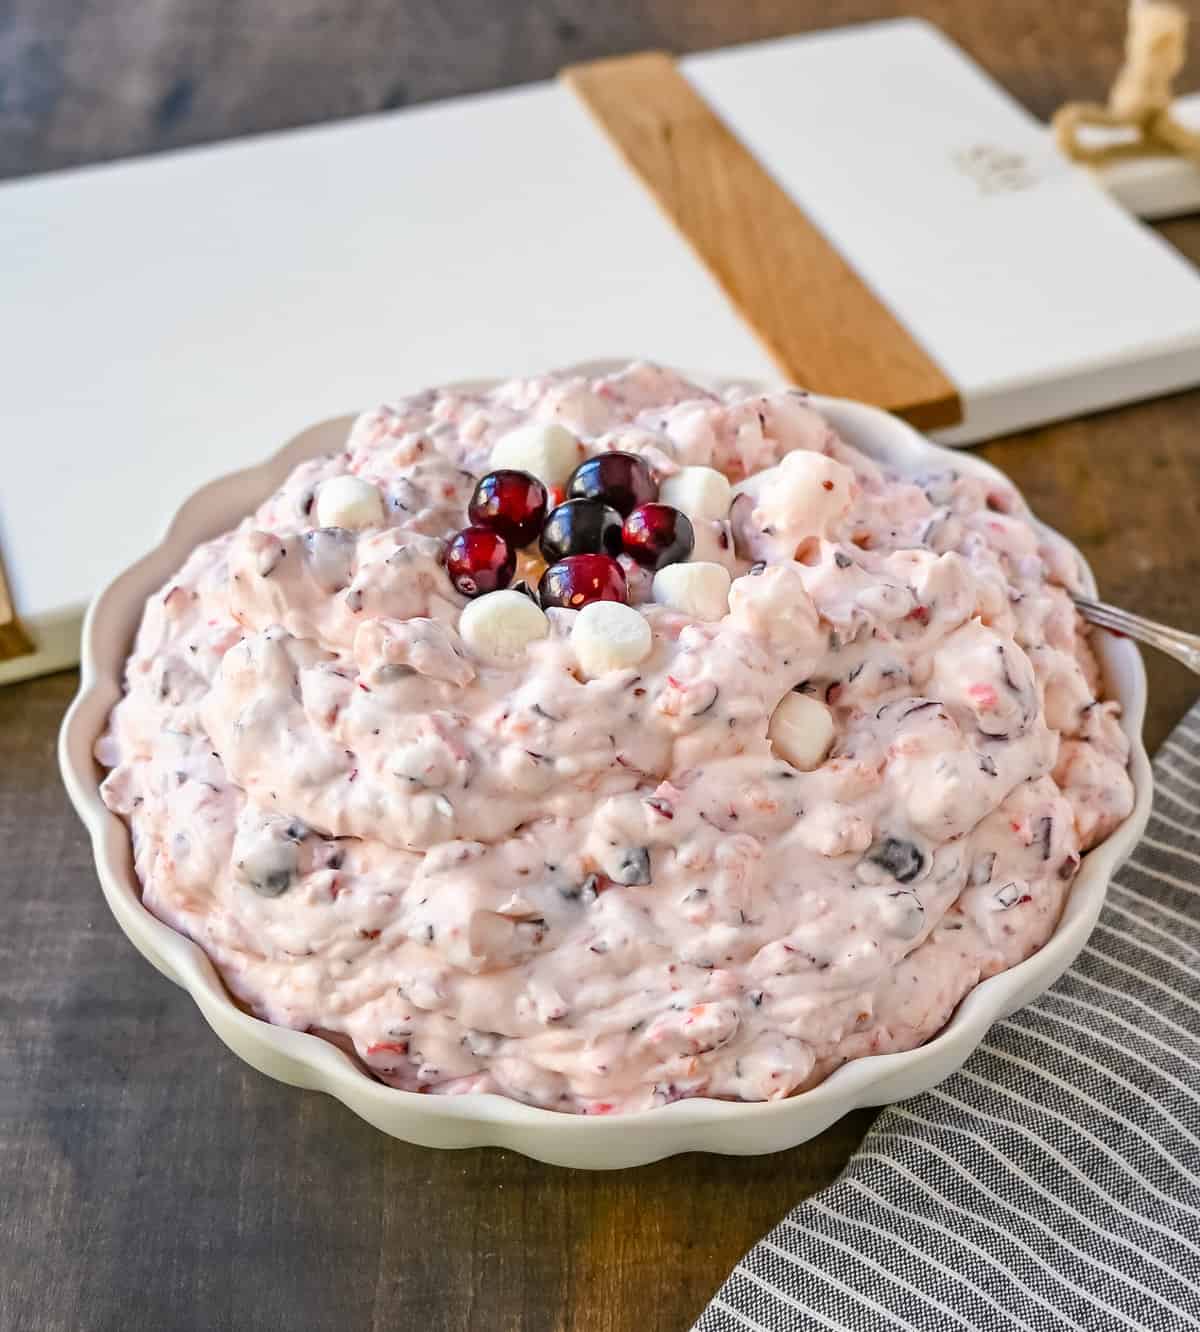 Cranberry Fluff Salad. This is such a popular holiday side dish! This easy cranberry salad is made with fresh cranberries, fresh pineapple, mini marshmallows, cream cheese, sugar, and fresh whipped cream. Perfectly sweet, tart, and creamy. This classic side dish recipe has been modernized and is better than ever!